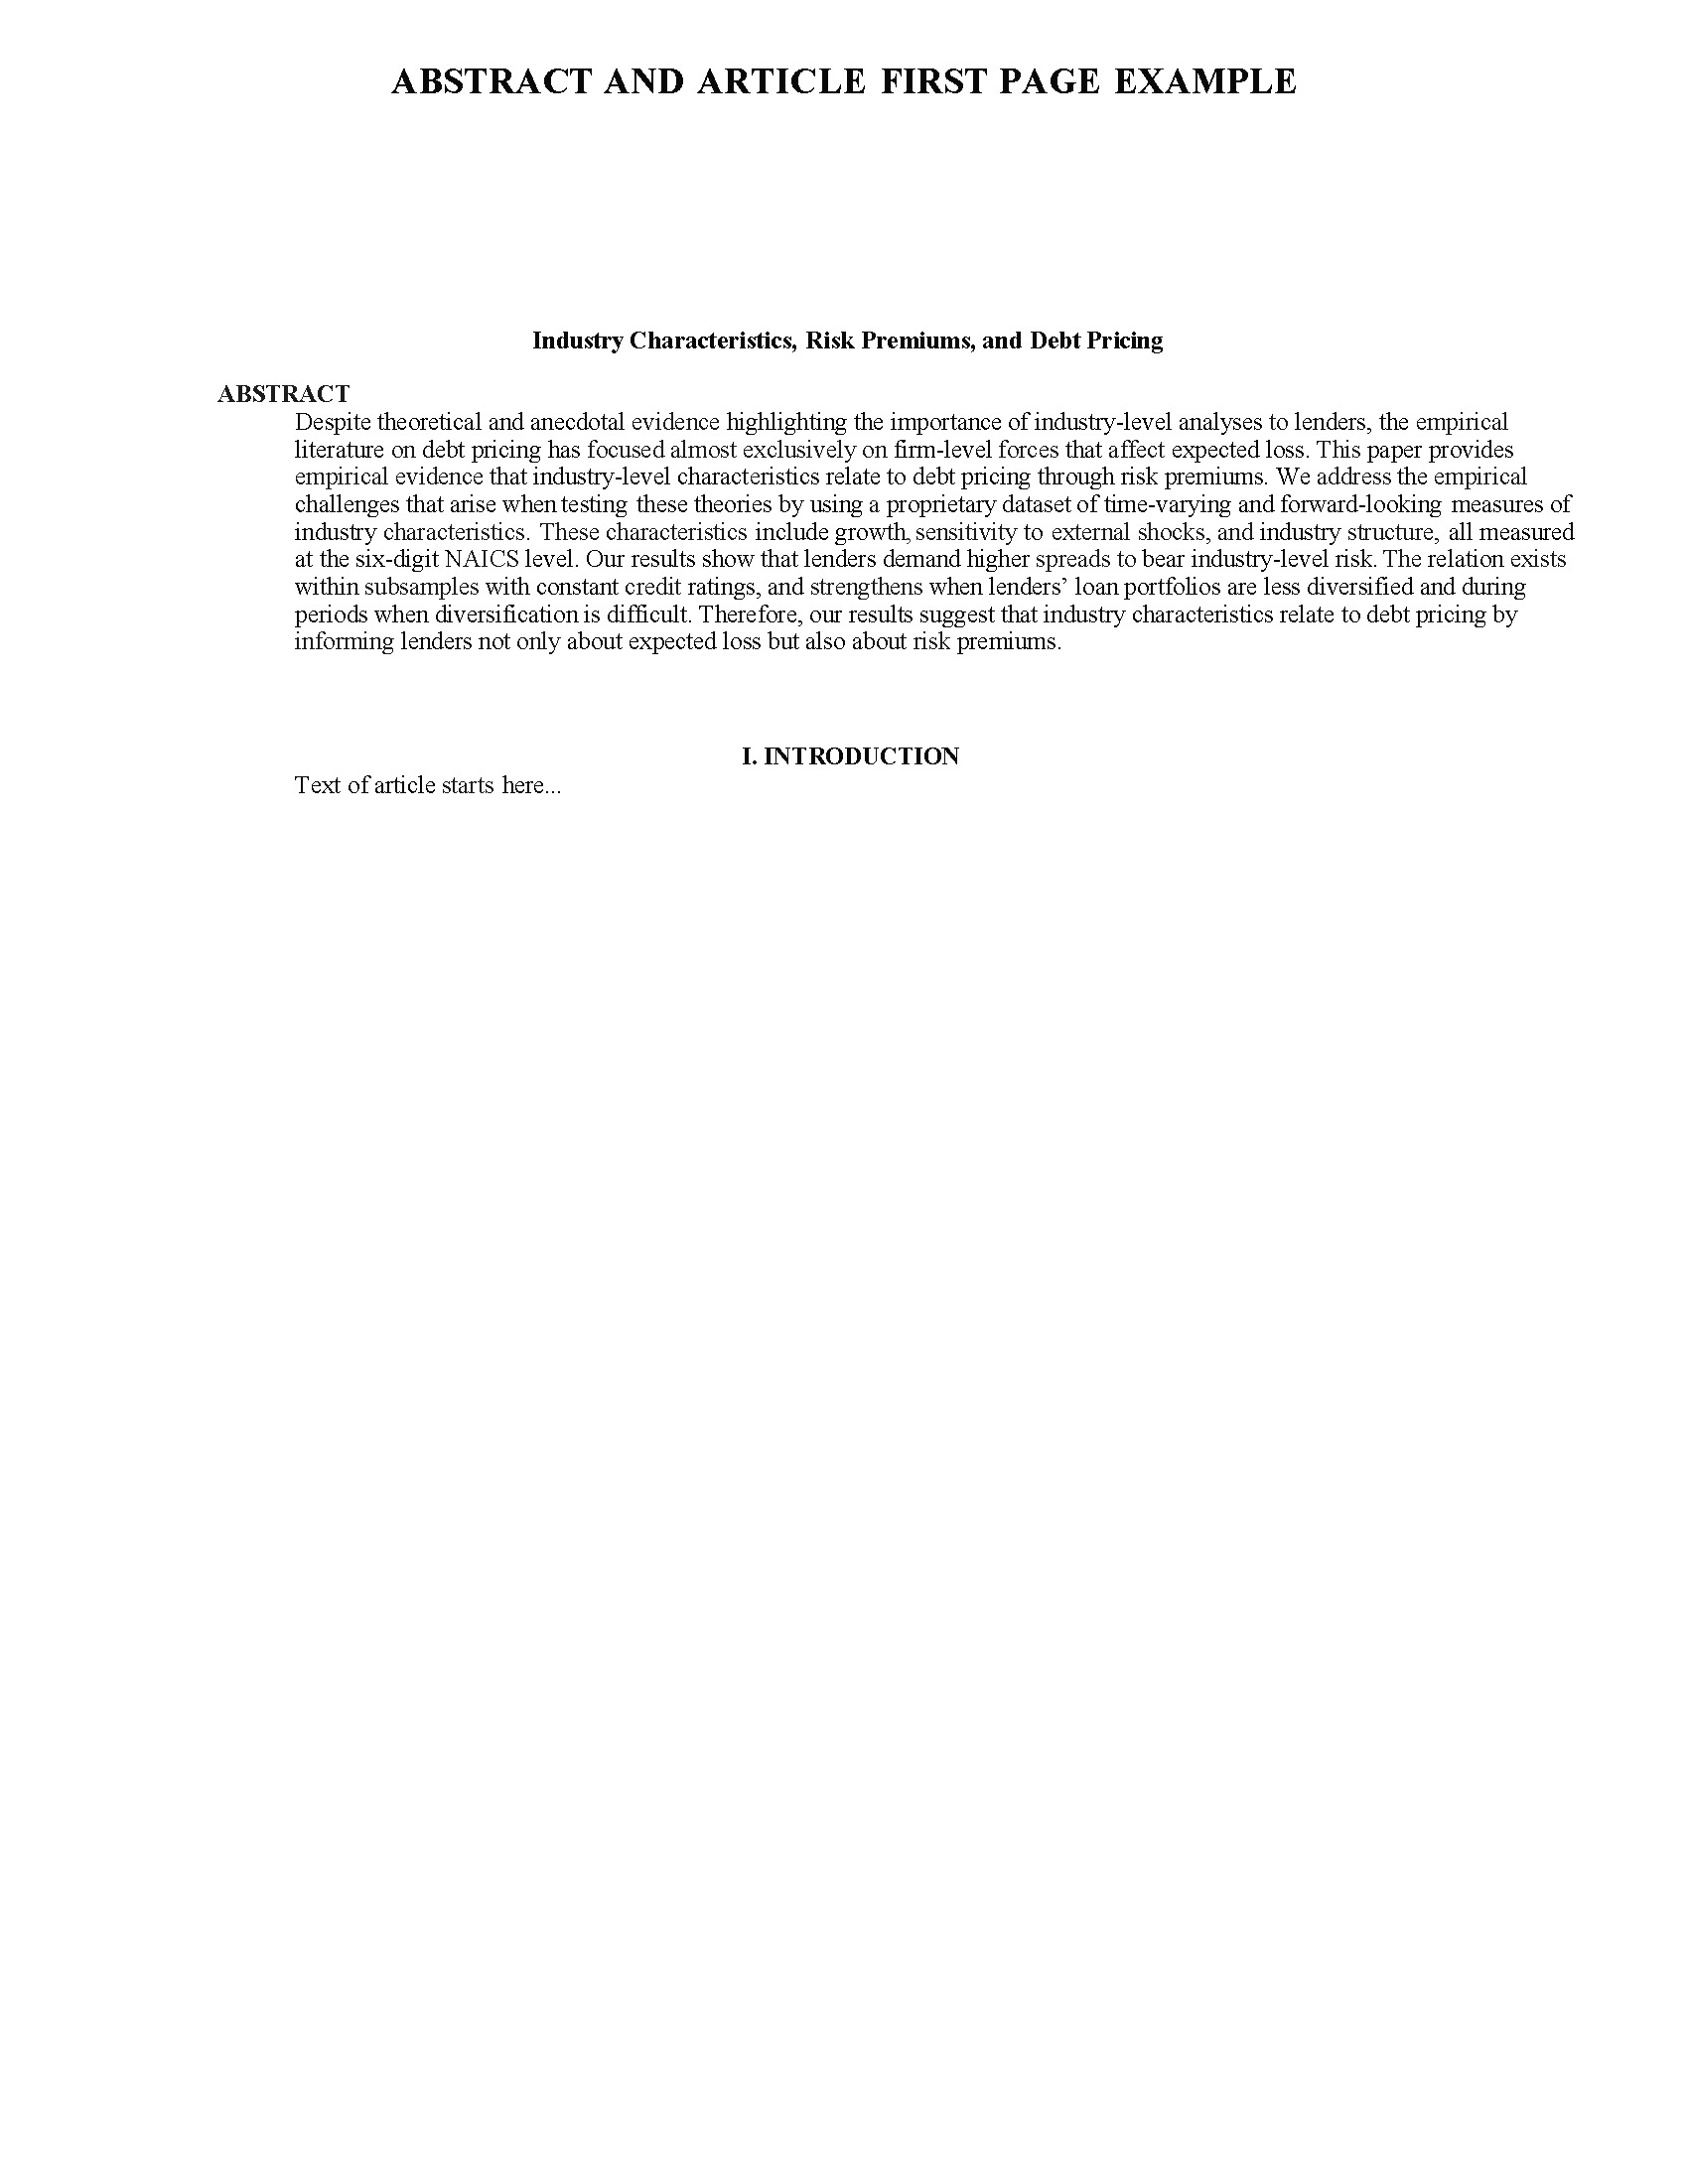 Abstract and article first page example